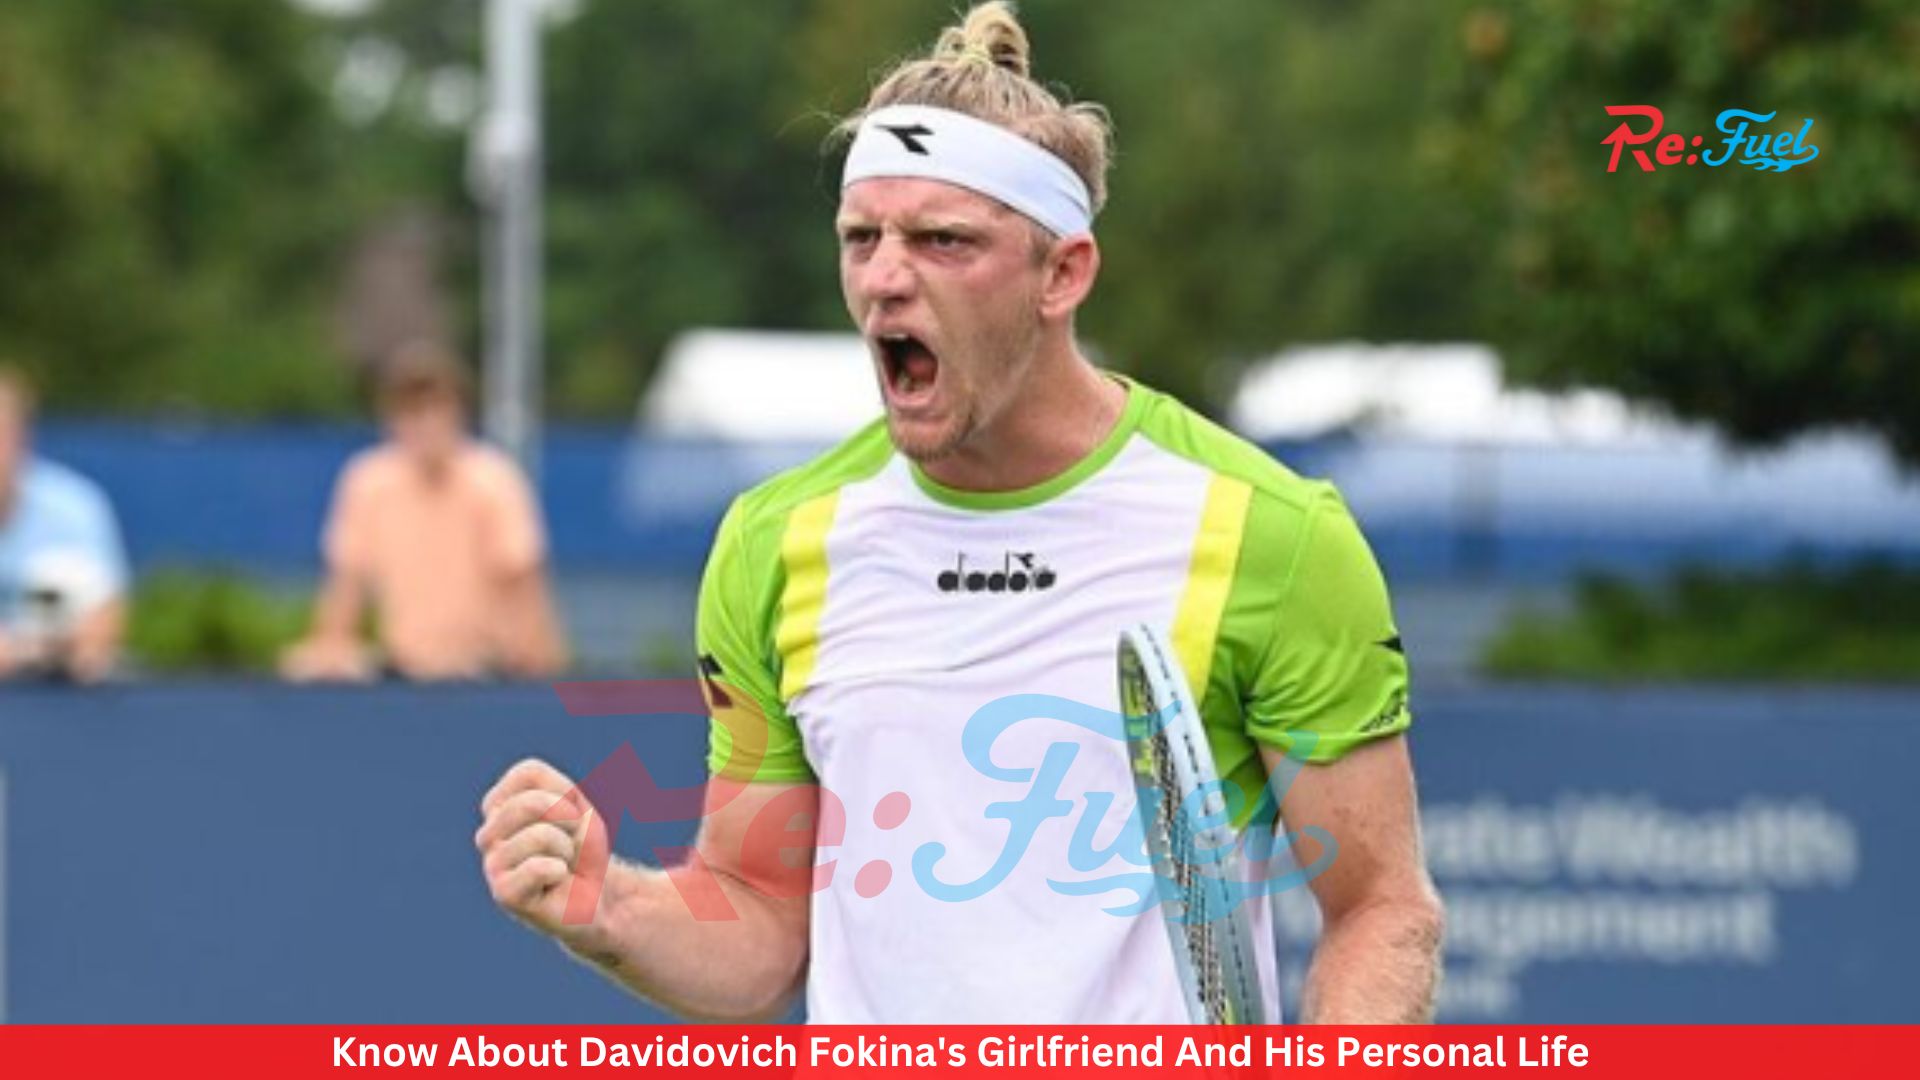 Know About Davidovich Fokina's Girlfriend And His Personal Life